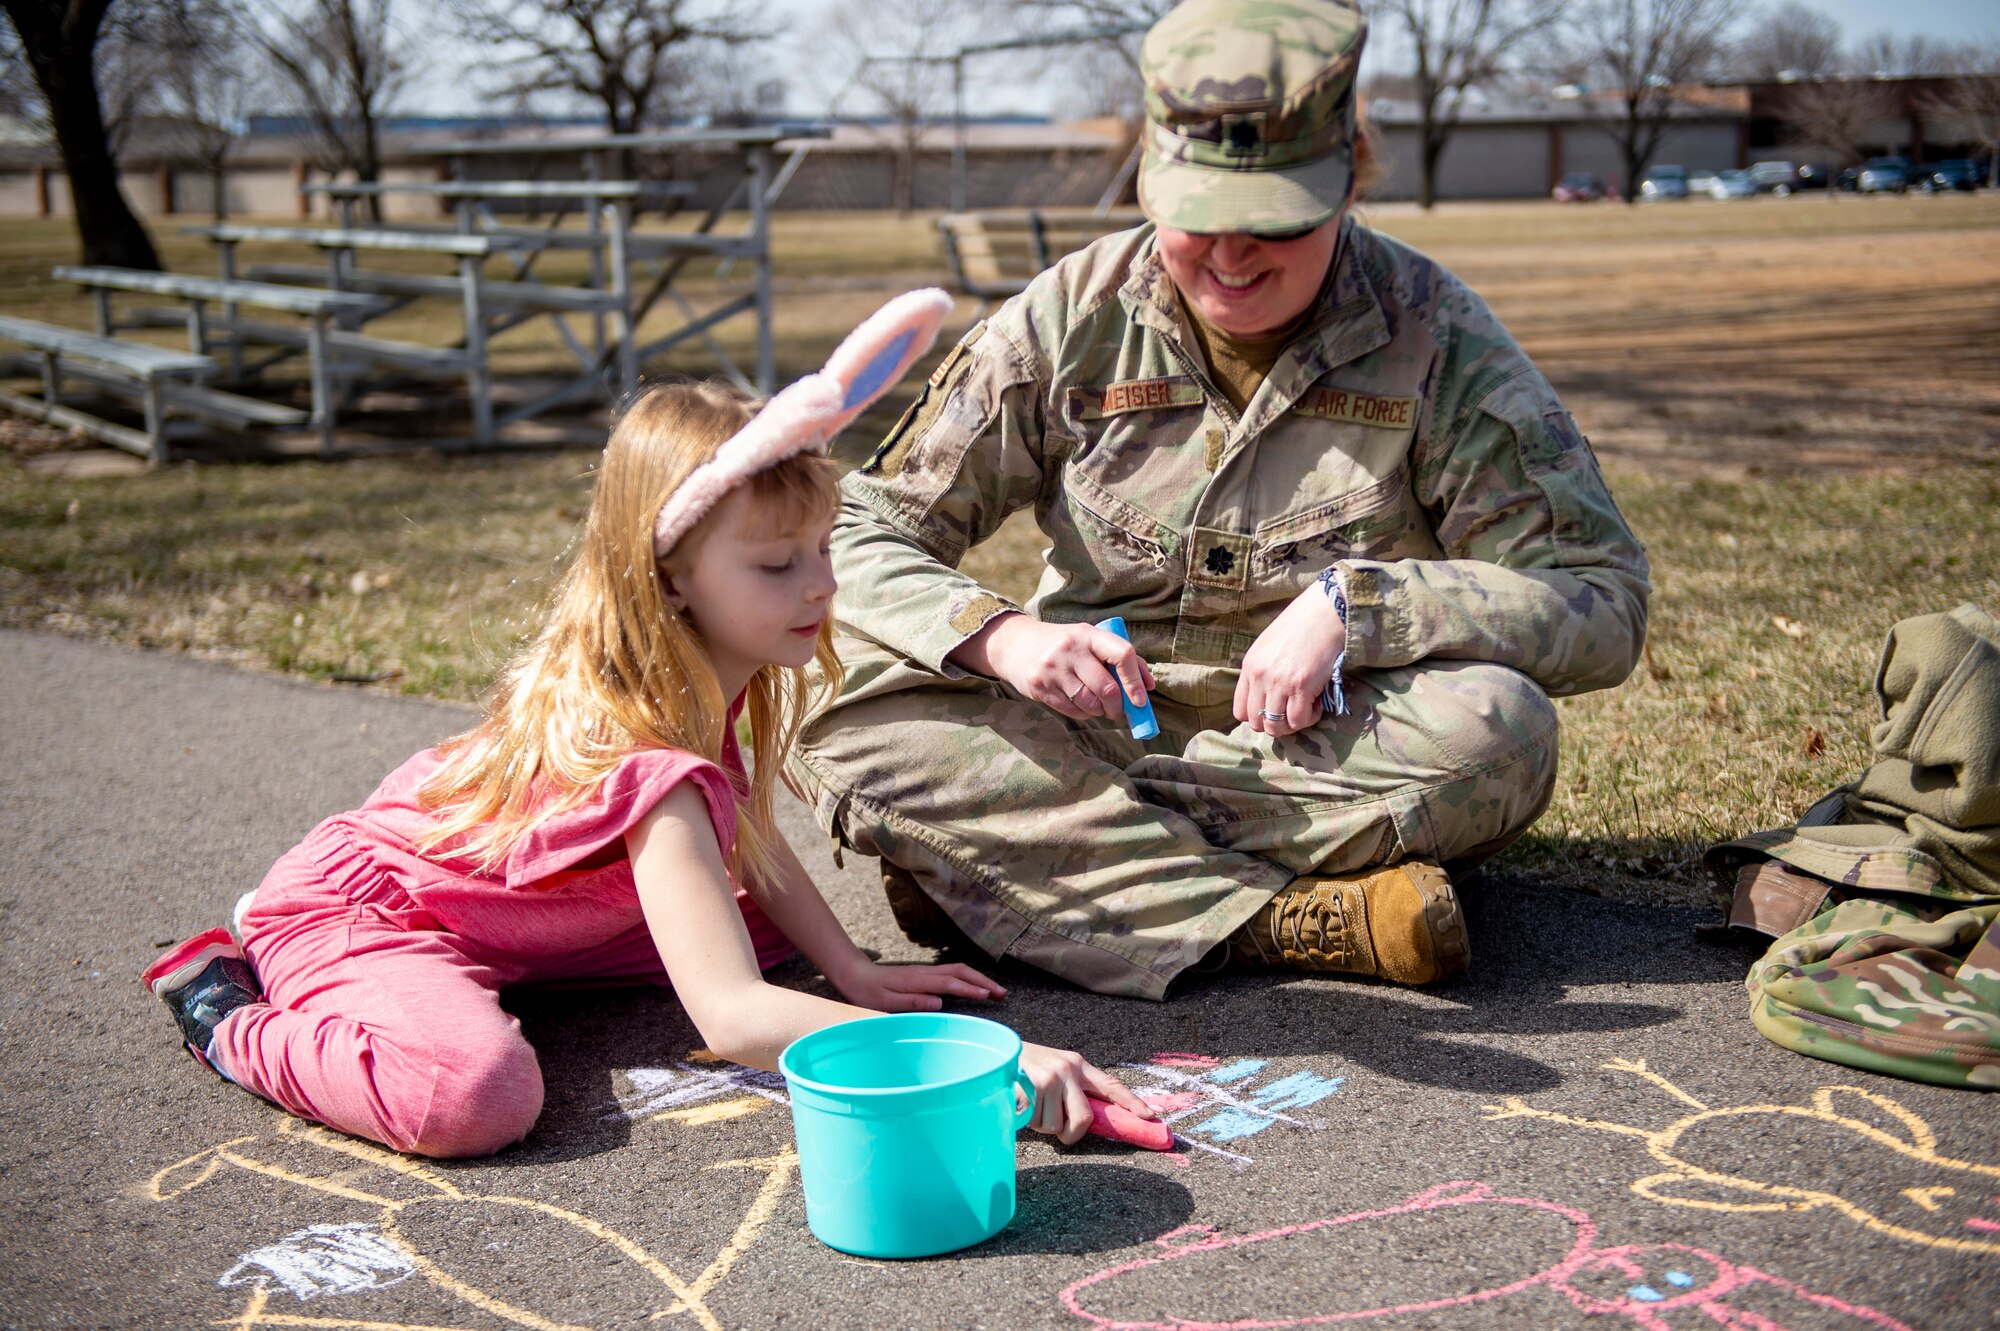 Airmen and their family members from the 133rd Airlift Wing participated in Easter-themed activities in St. Paul, Minn., April 9, 2022. The event was hosted by wing key volunteers, Contact Club members, and the Airmen and Family Readiness Program.